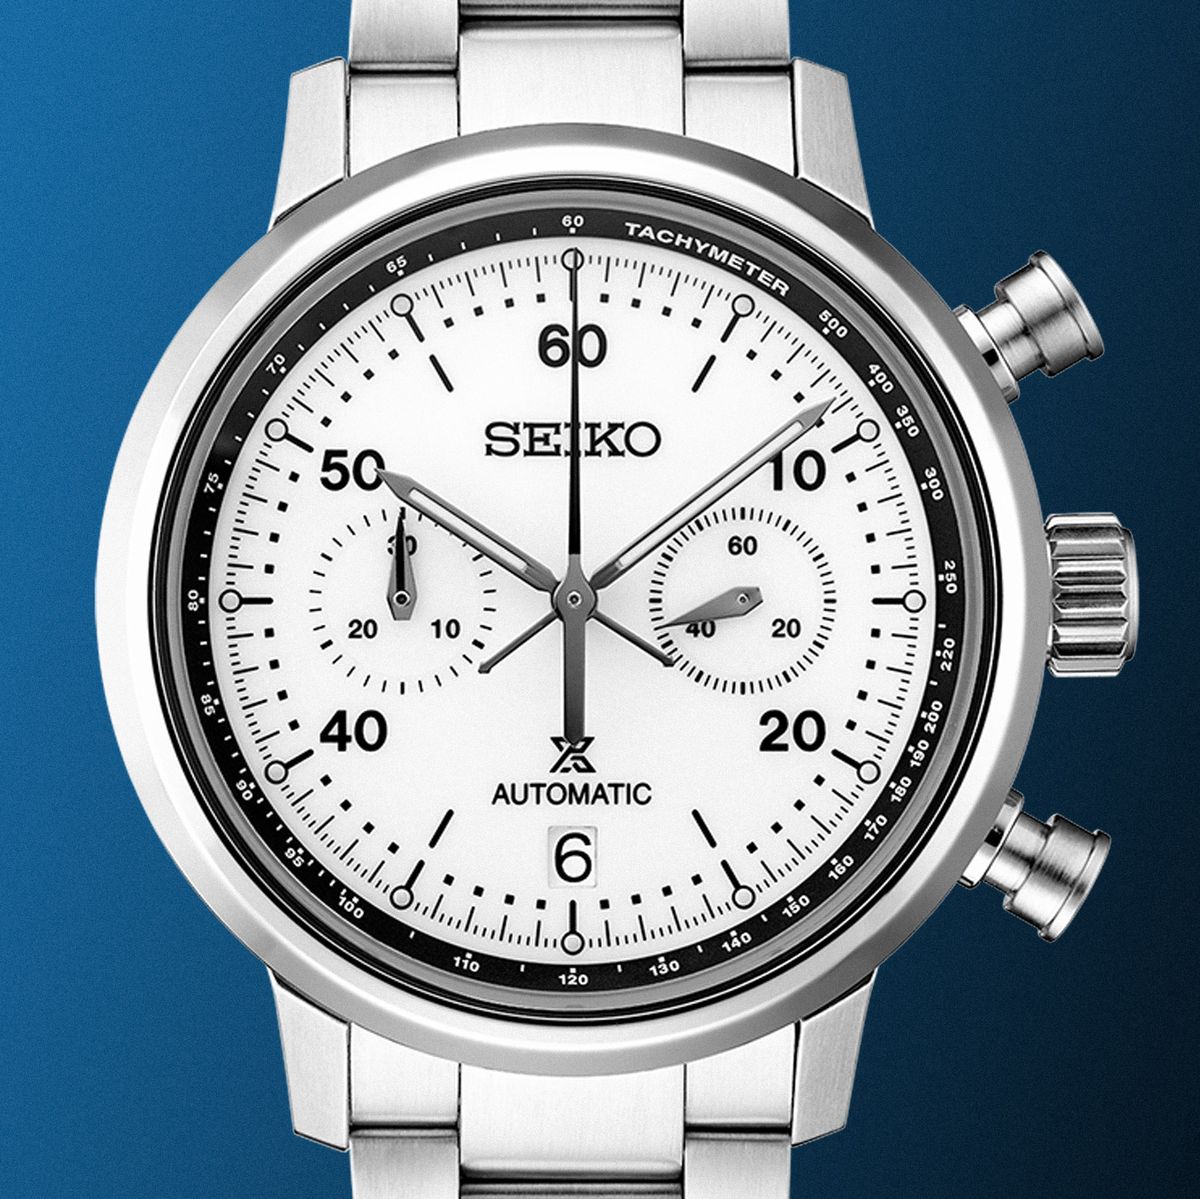 It's About Time Seiko Leveraged Its Great Chronograph History